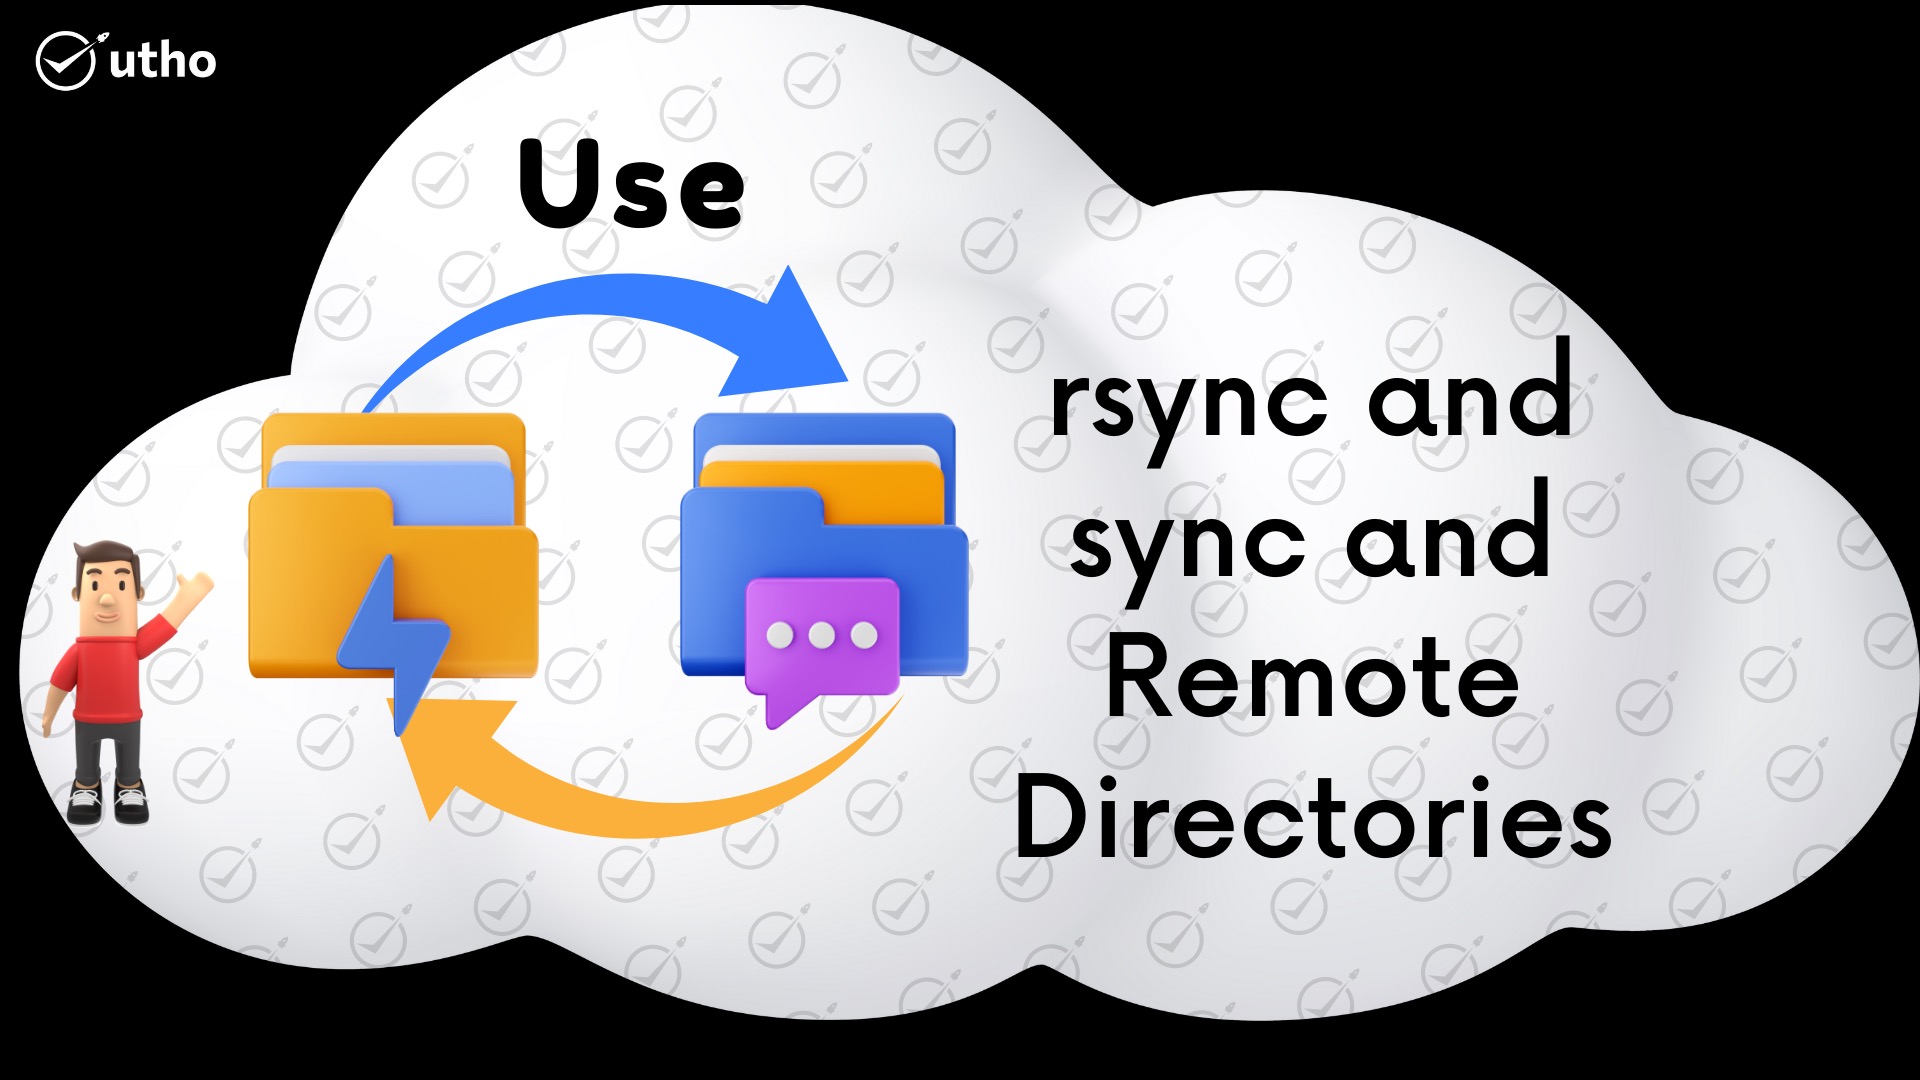 How To Use Rsync to Sync Local and Remote Directories